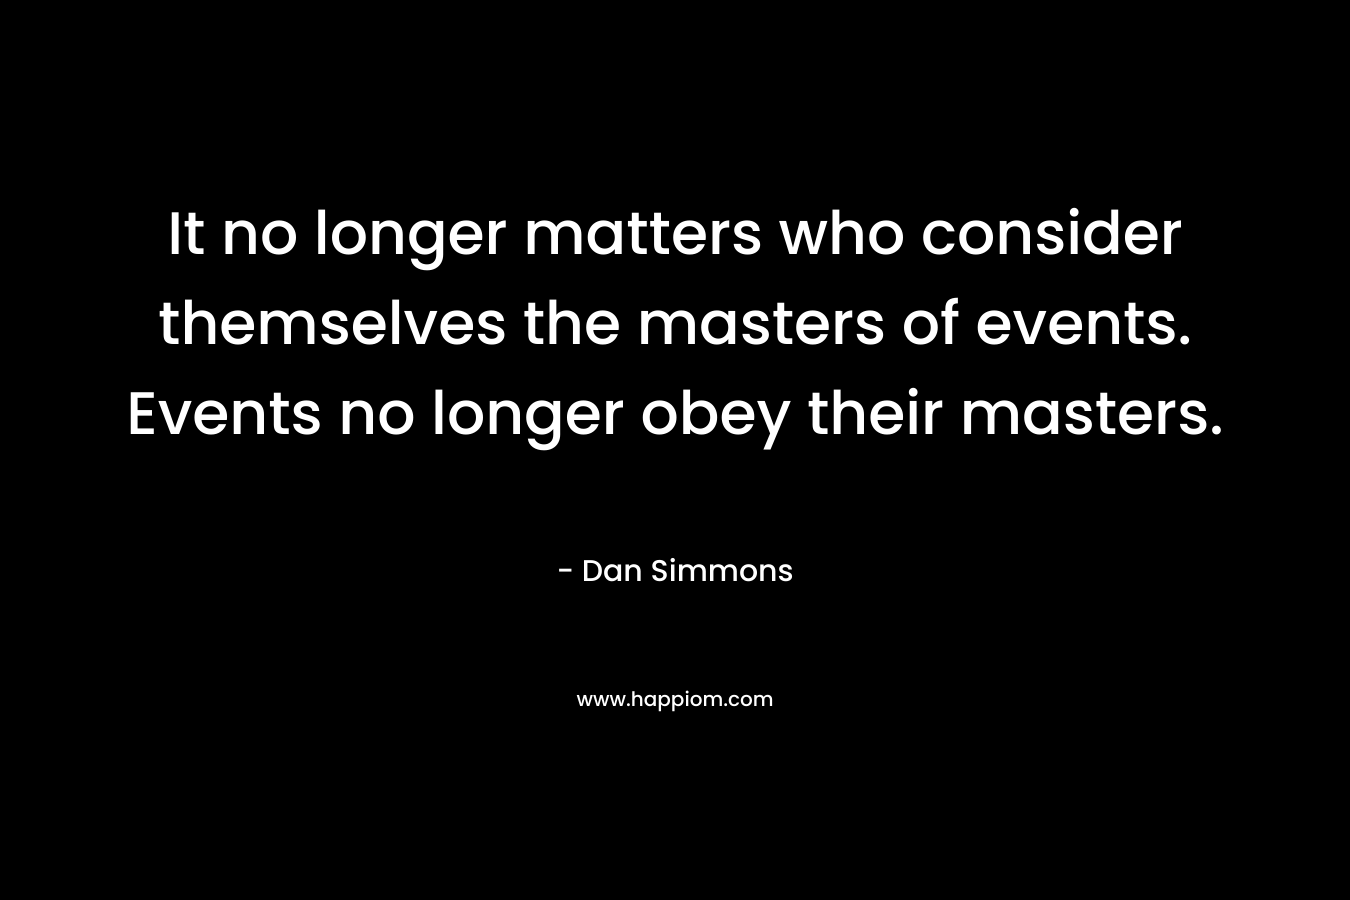 It no longer matters who consider themselves the masters of events. Events no longer obey their masters.